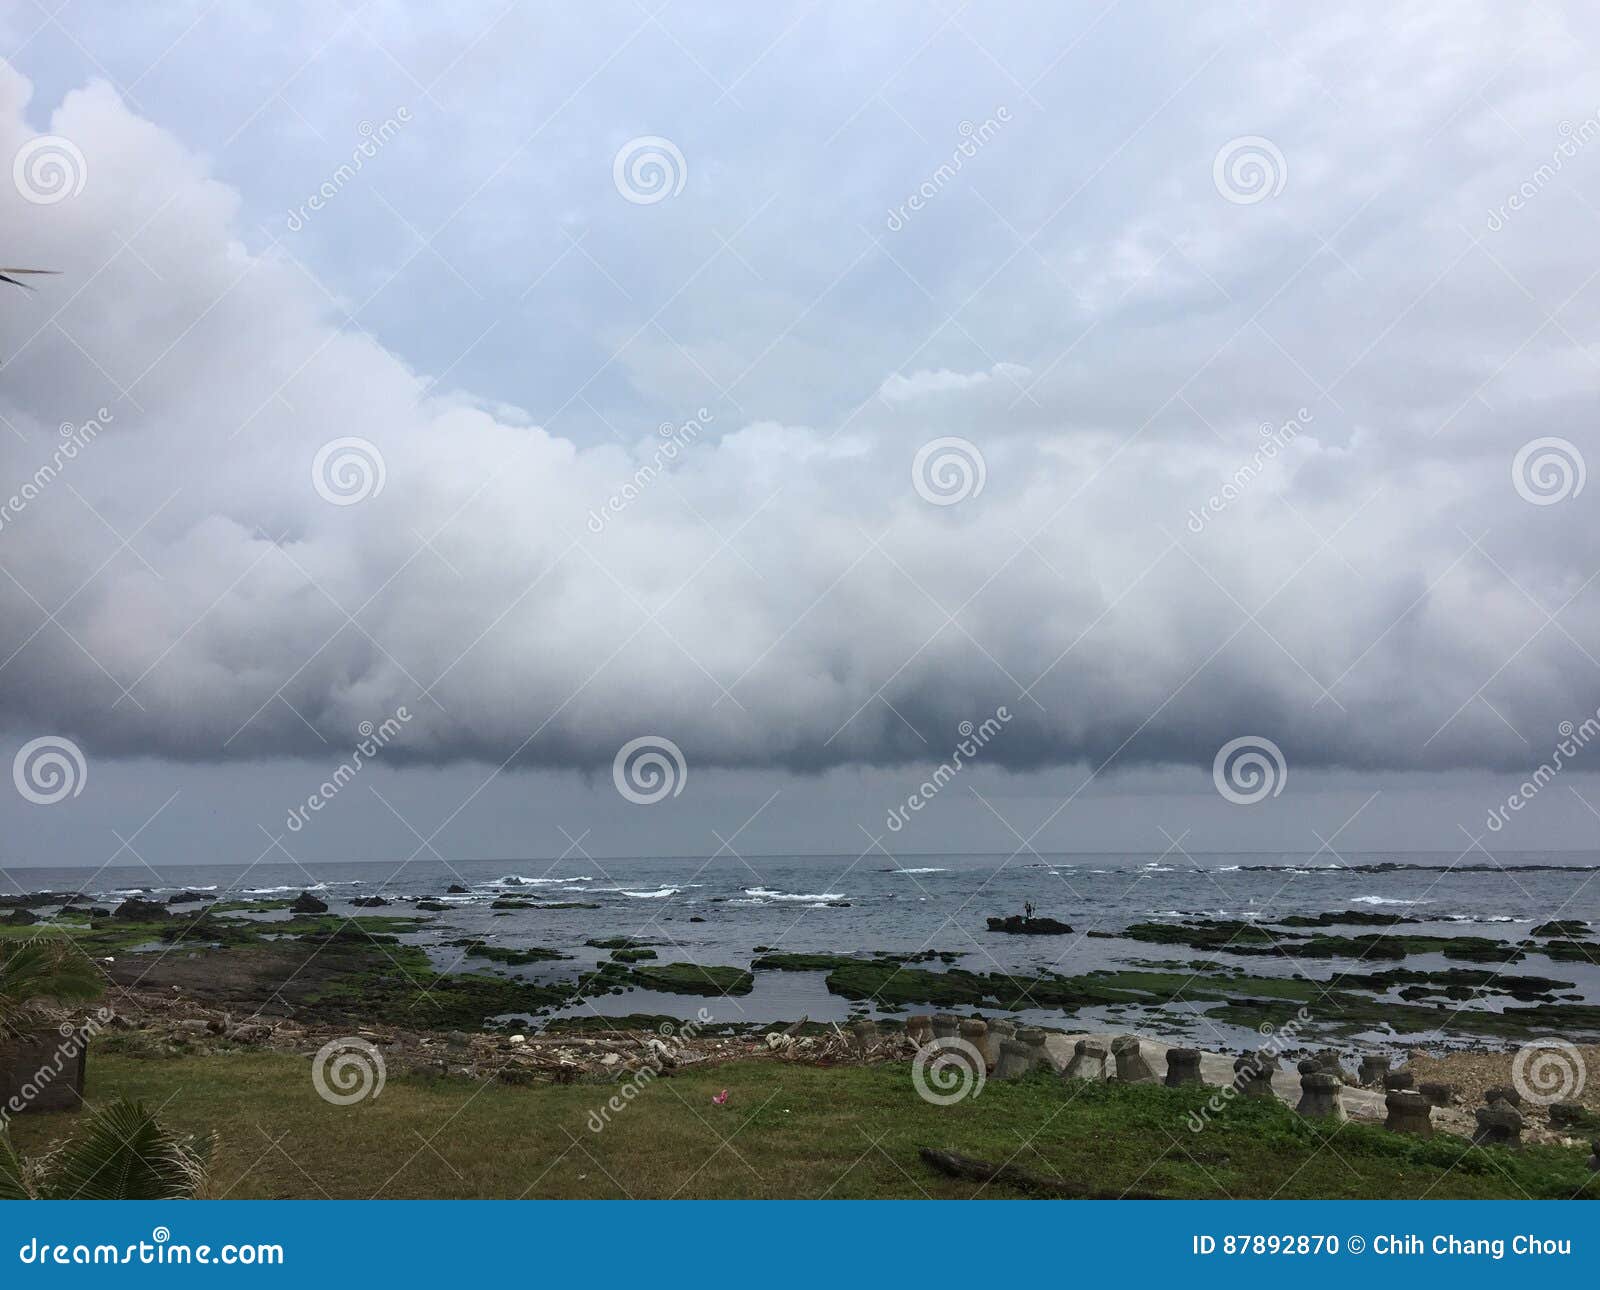 rocky foreshore and low cloud over the sea